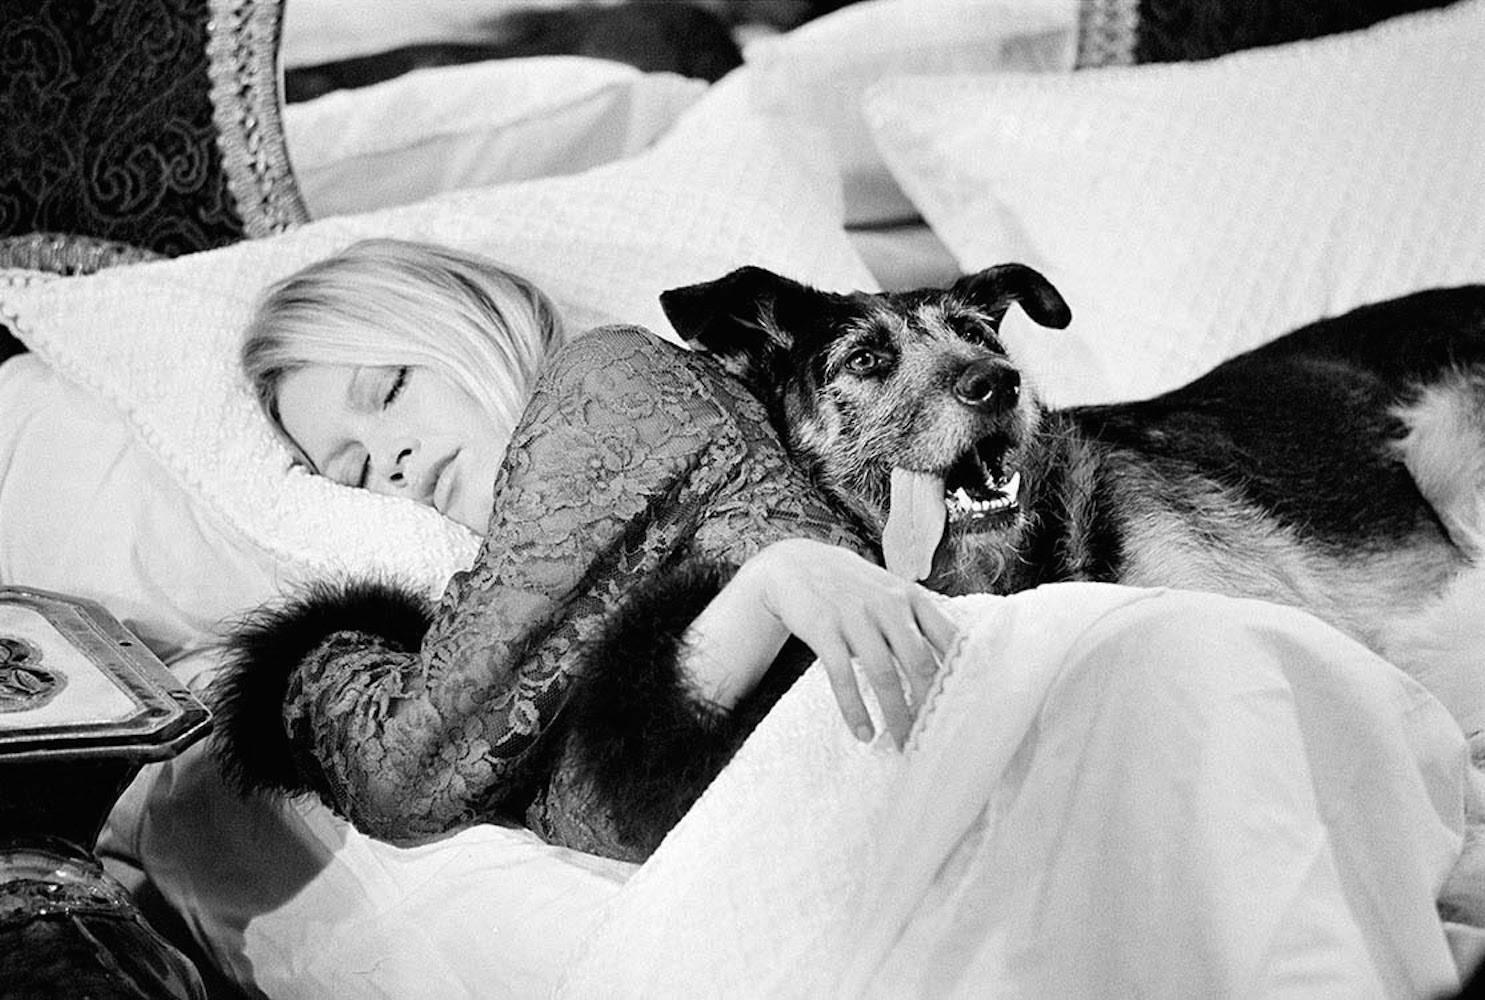 Terry O'Neill Portrait Photograph - Bardot with Dog, on set of Les Novices (16" x 20" Co-Signed)